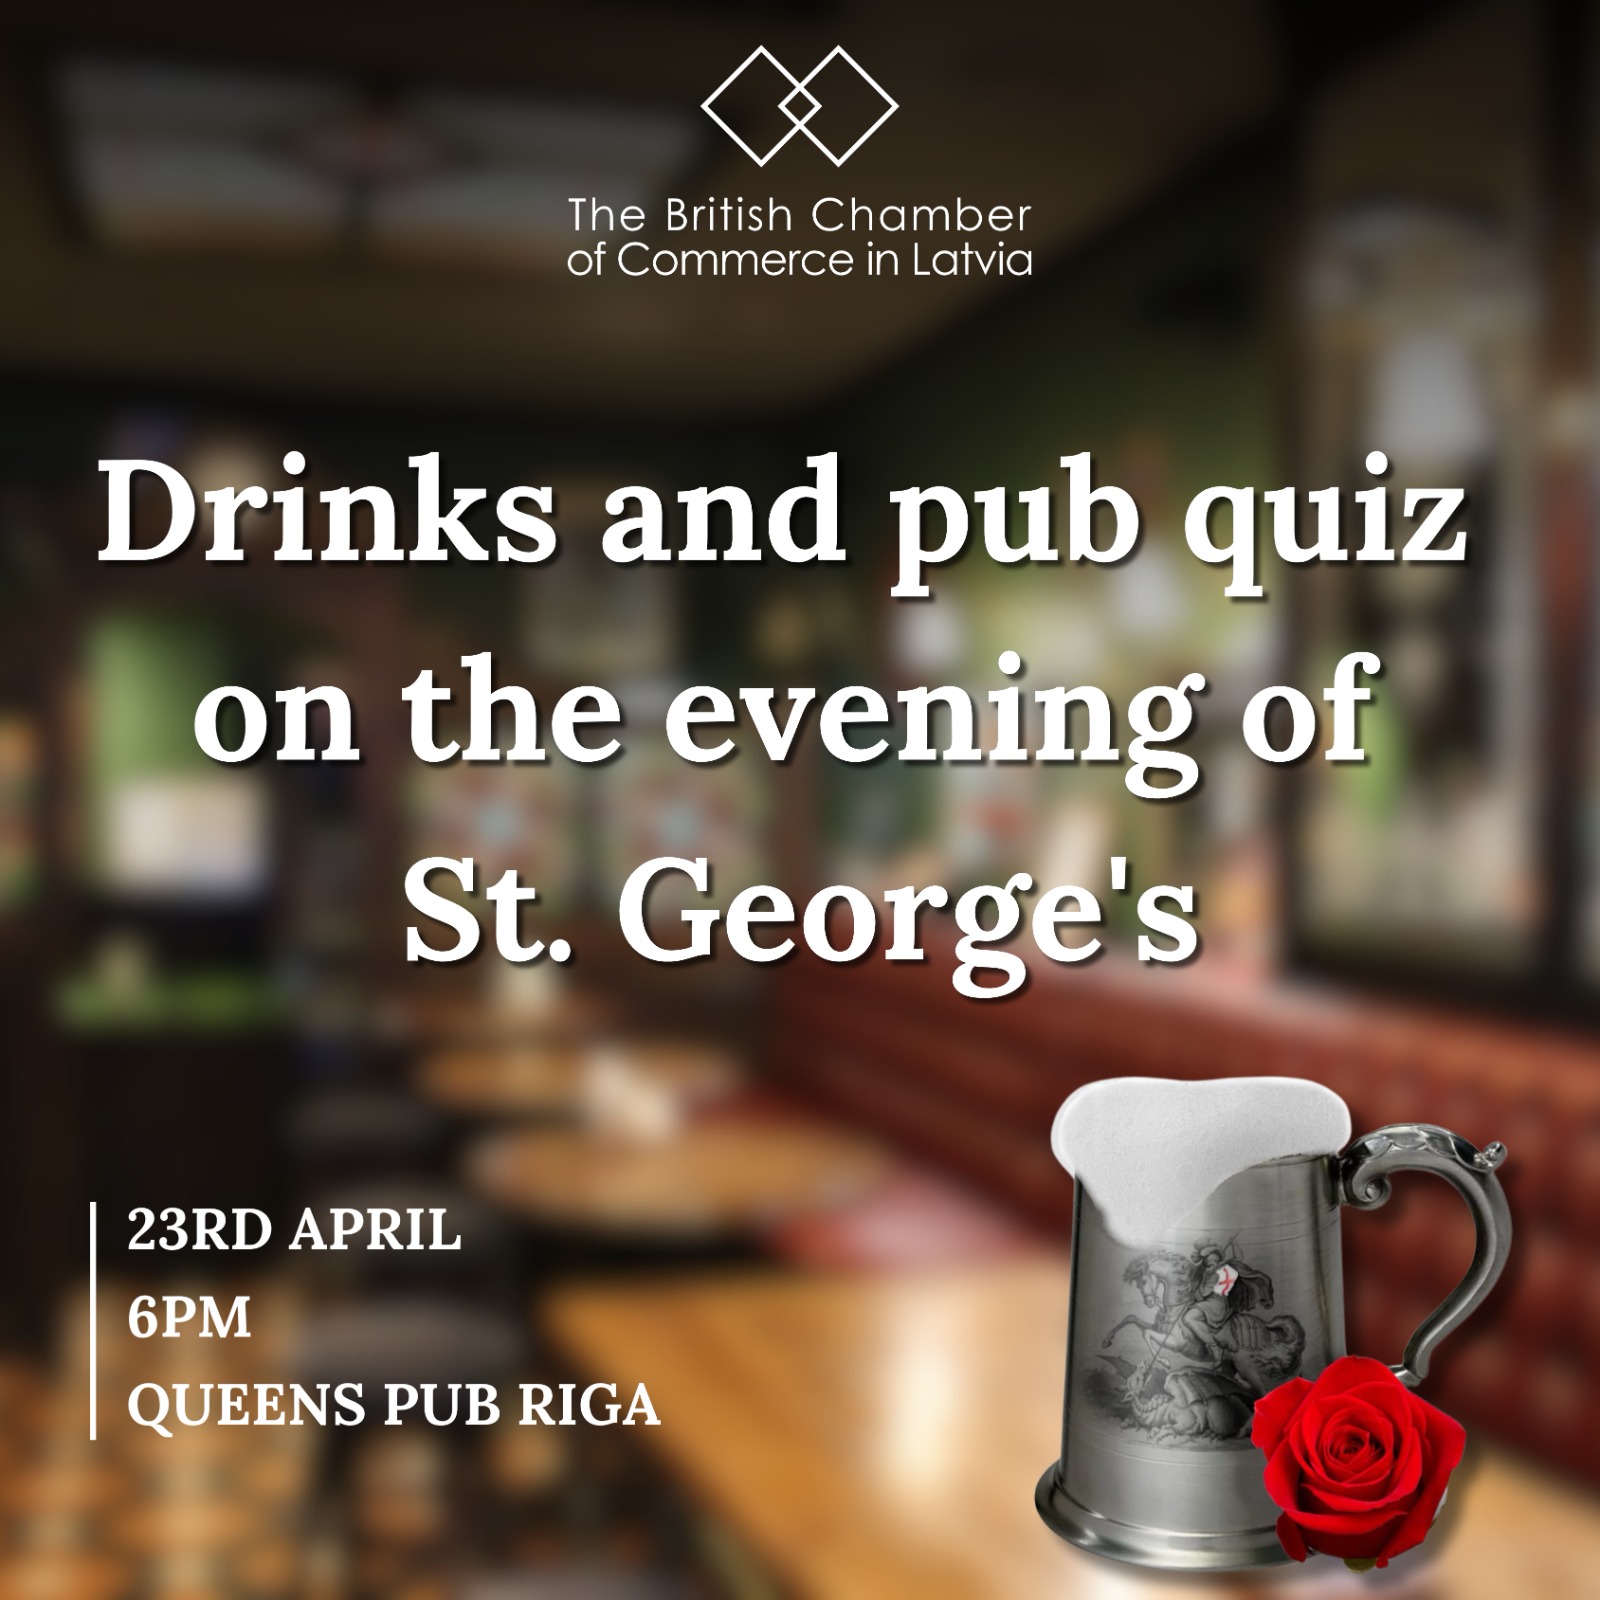 Drinks and Quiz on the evening of St. George’s